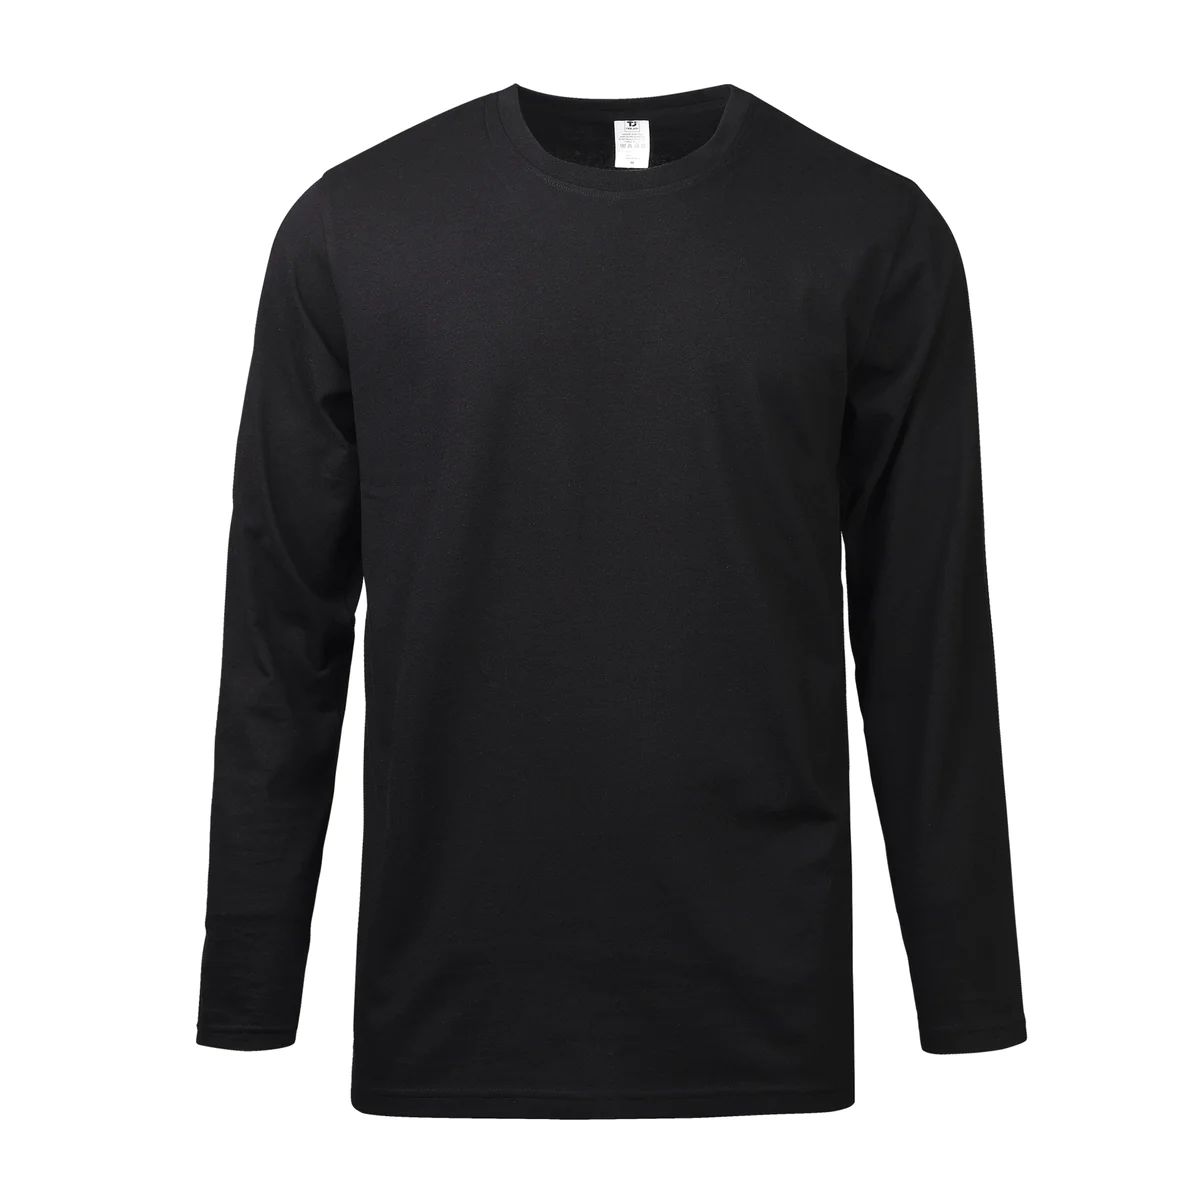 60 Pieces of Men's Classic Crew Neck Long Sleeves T-Shirt Size 3xl